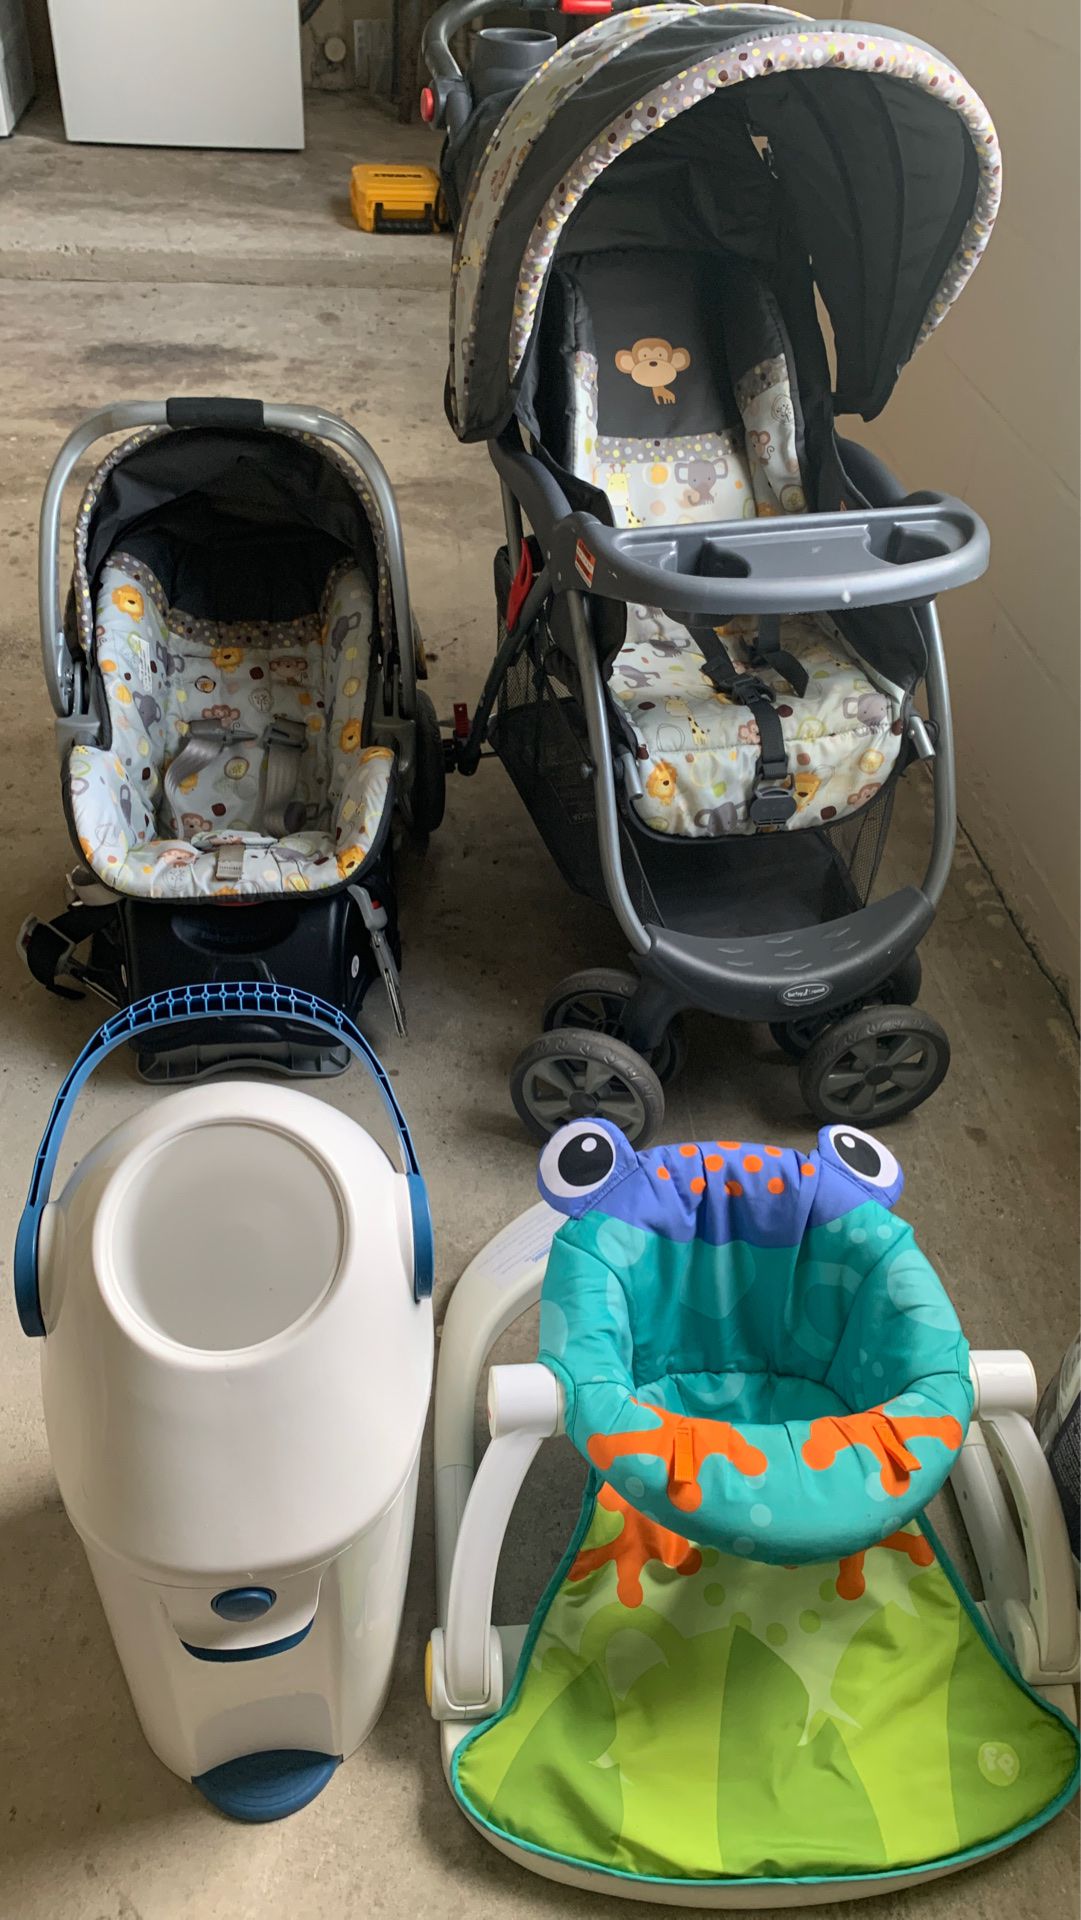 Car seat stroller baby Stan toy diapers can